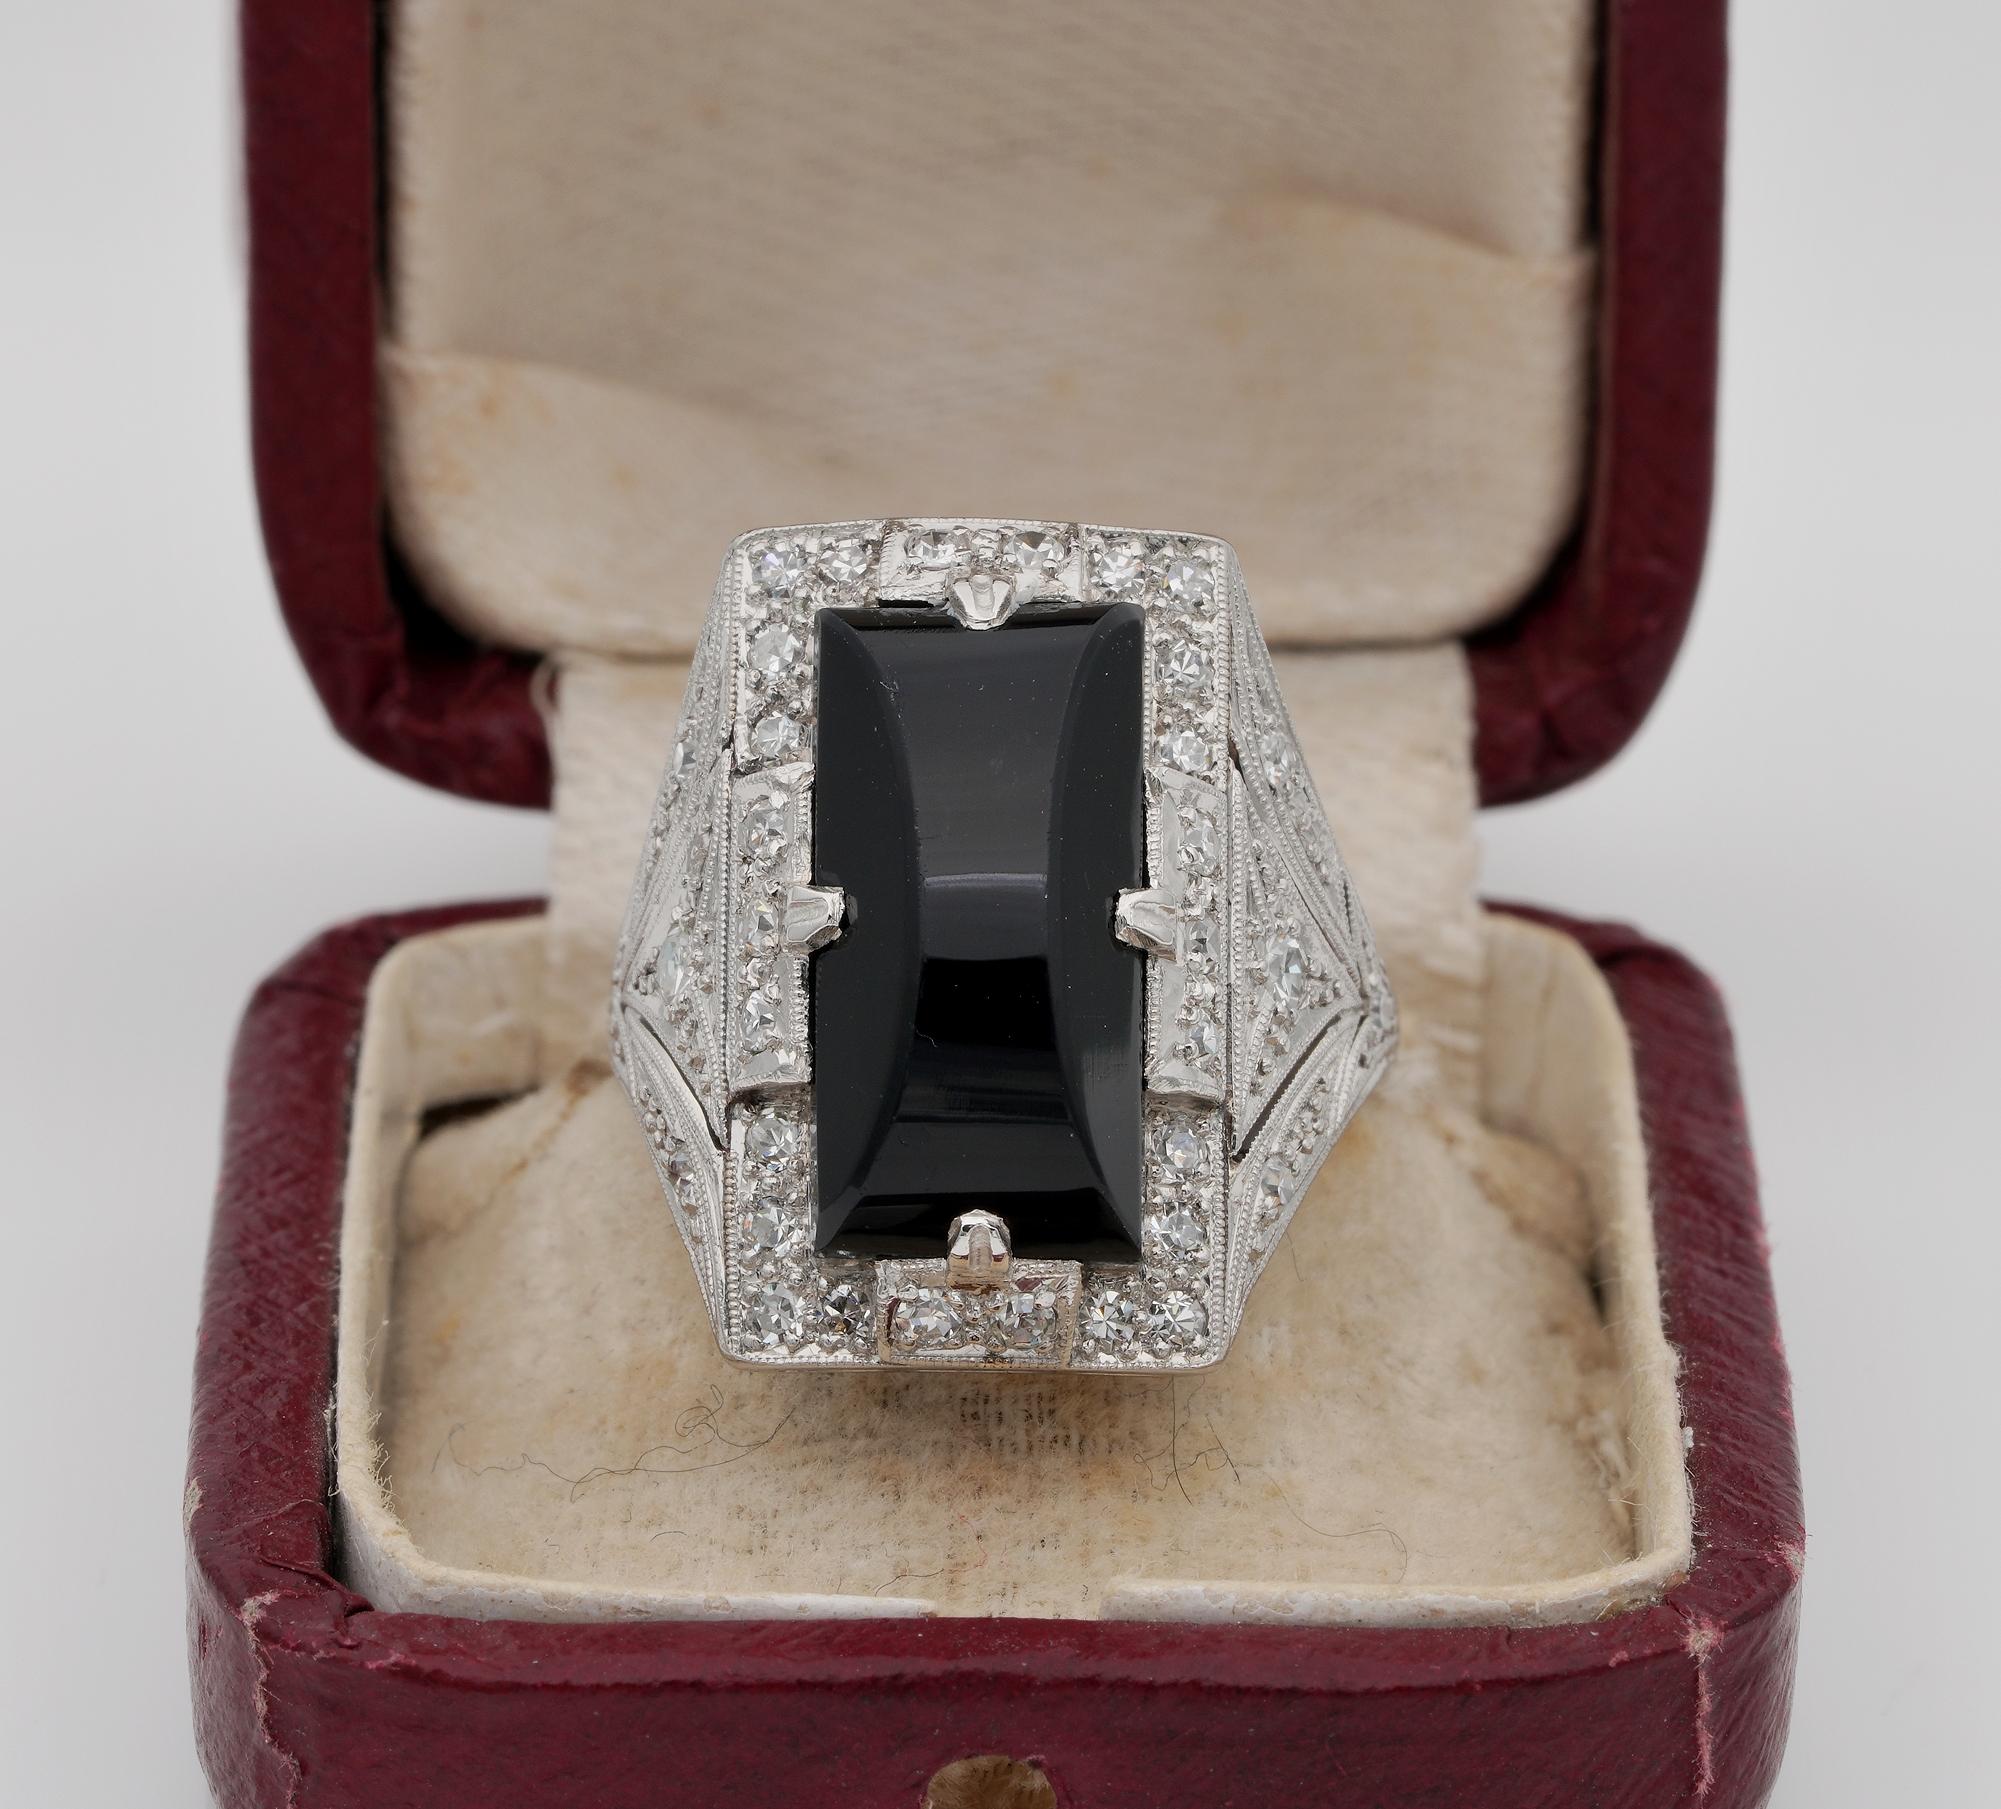 Black & White Elegance
Art Deco Black Onyx Diamond striking and dramatic design artfully rendered in Platinum
English maker mark active from 1931 to 1941
Custom cut elongate, polished Black Onyx stone of 17 mm. x 8 mm. set in a Diamond with carved